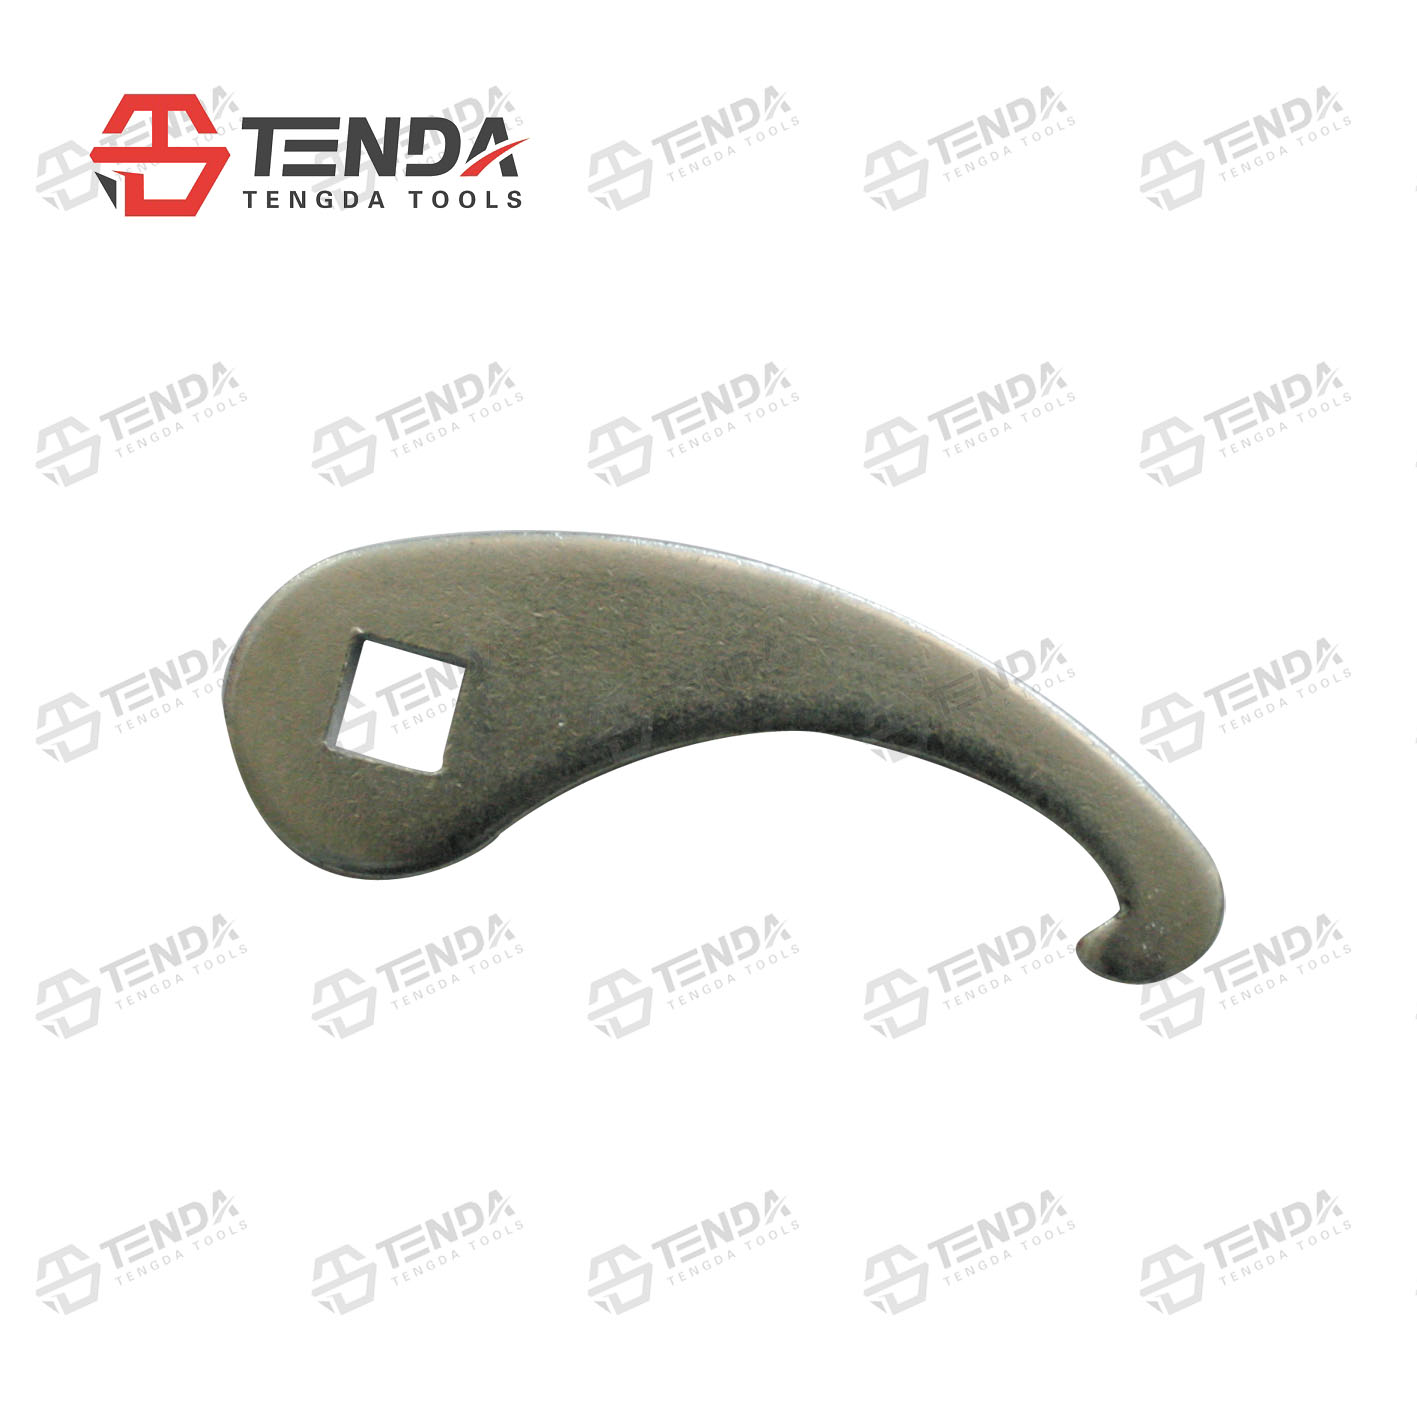 TD-047 Pre-load Spanner Wrench